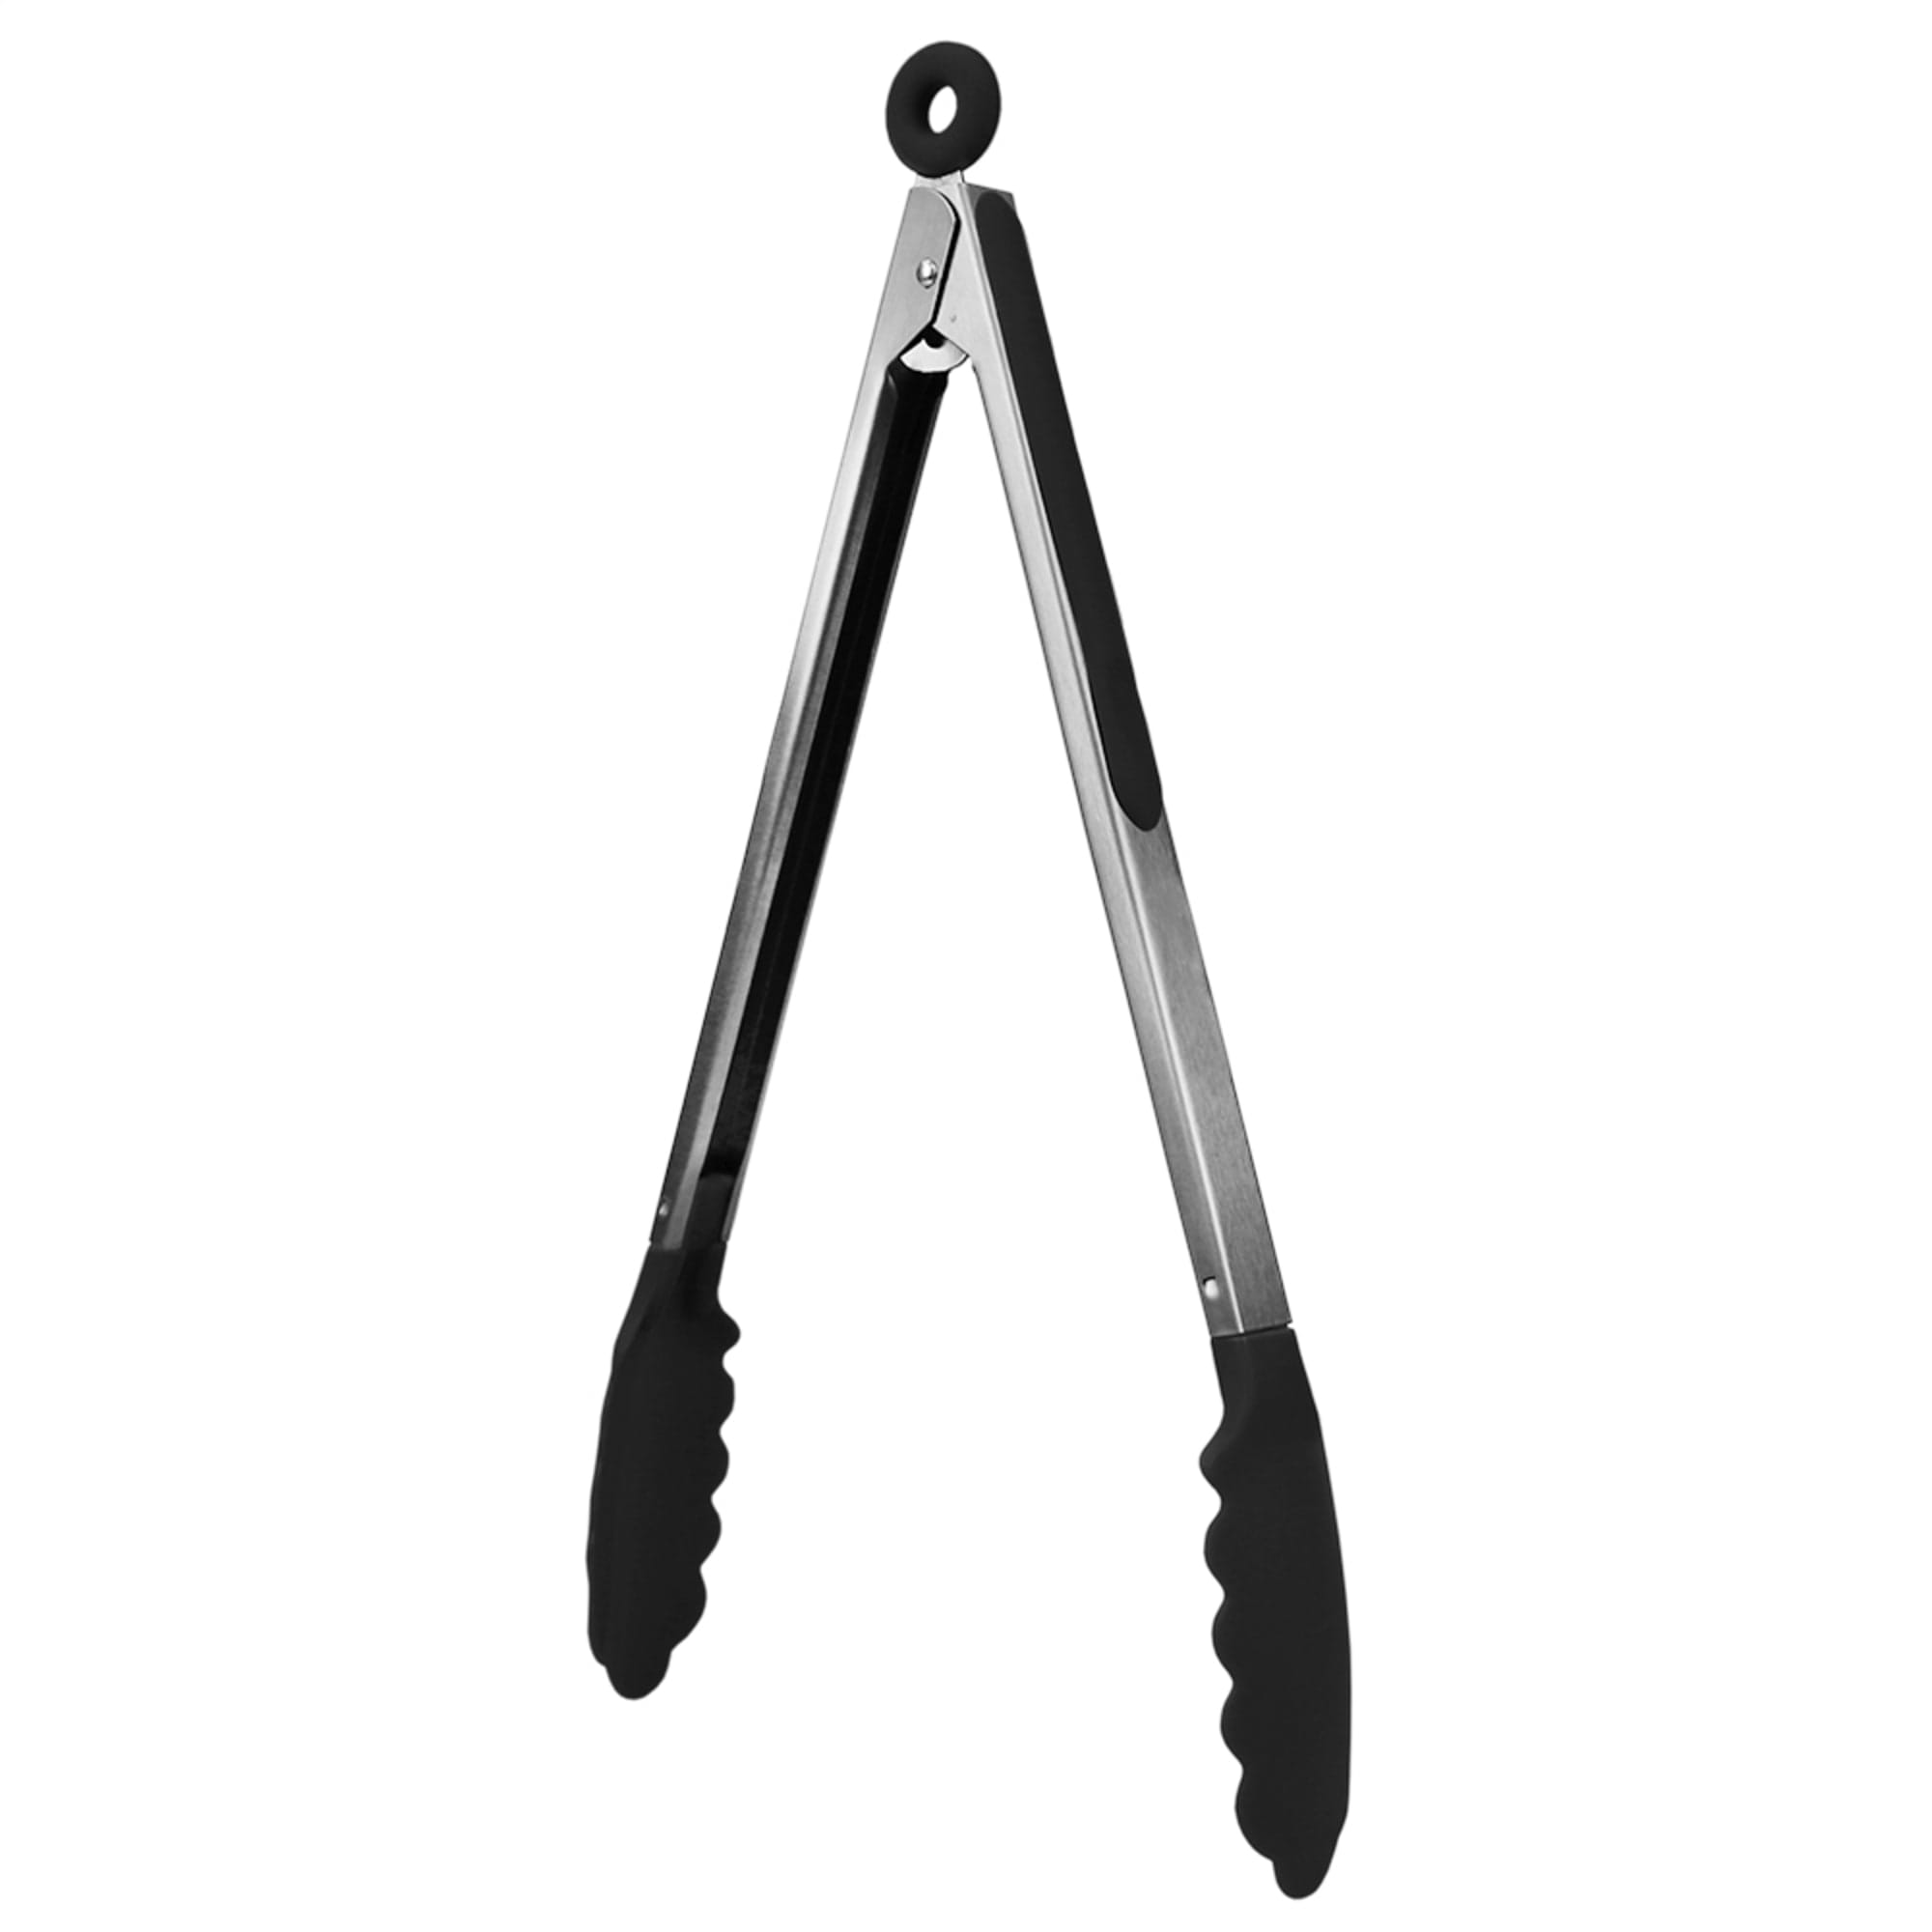 Home Basics Stainless Steel Silicone Kitchen Tongs, Black $2.00 EACH, CASE PACK OF 24